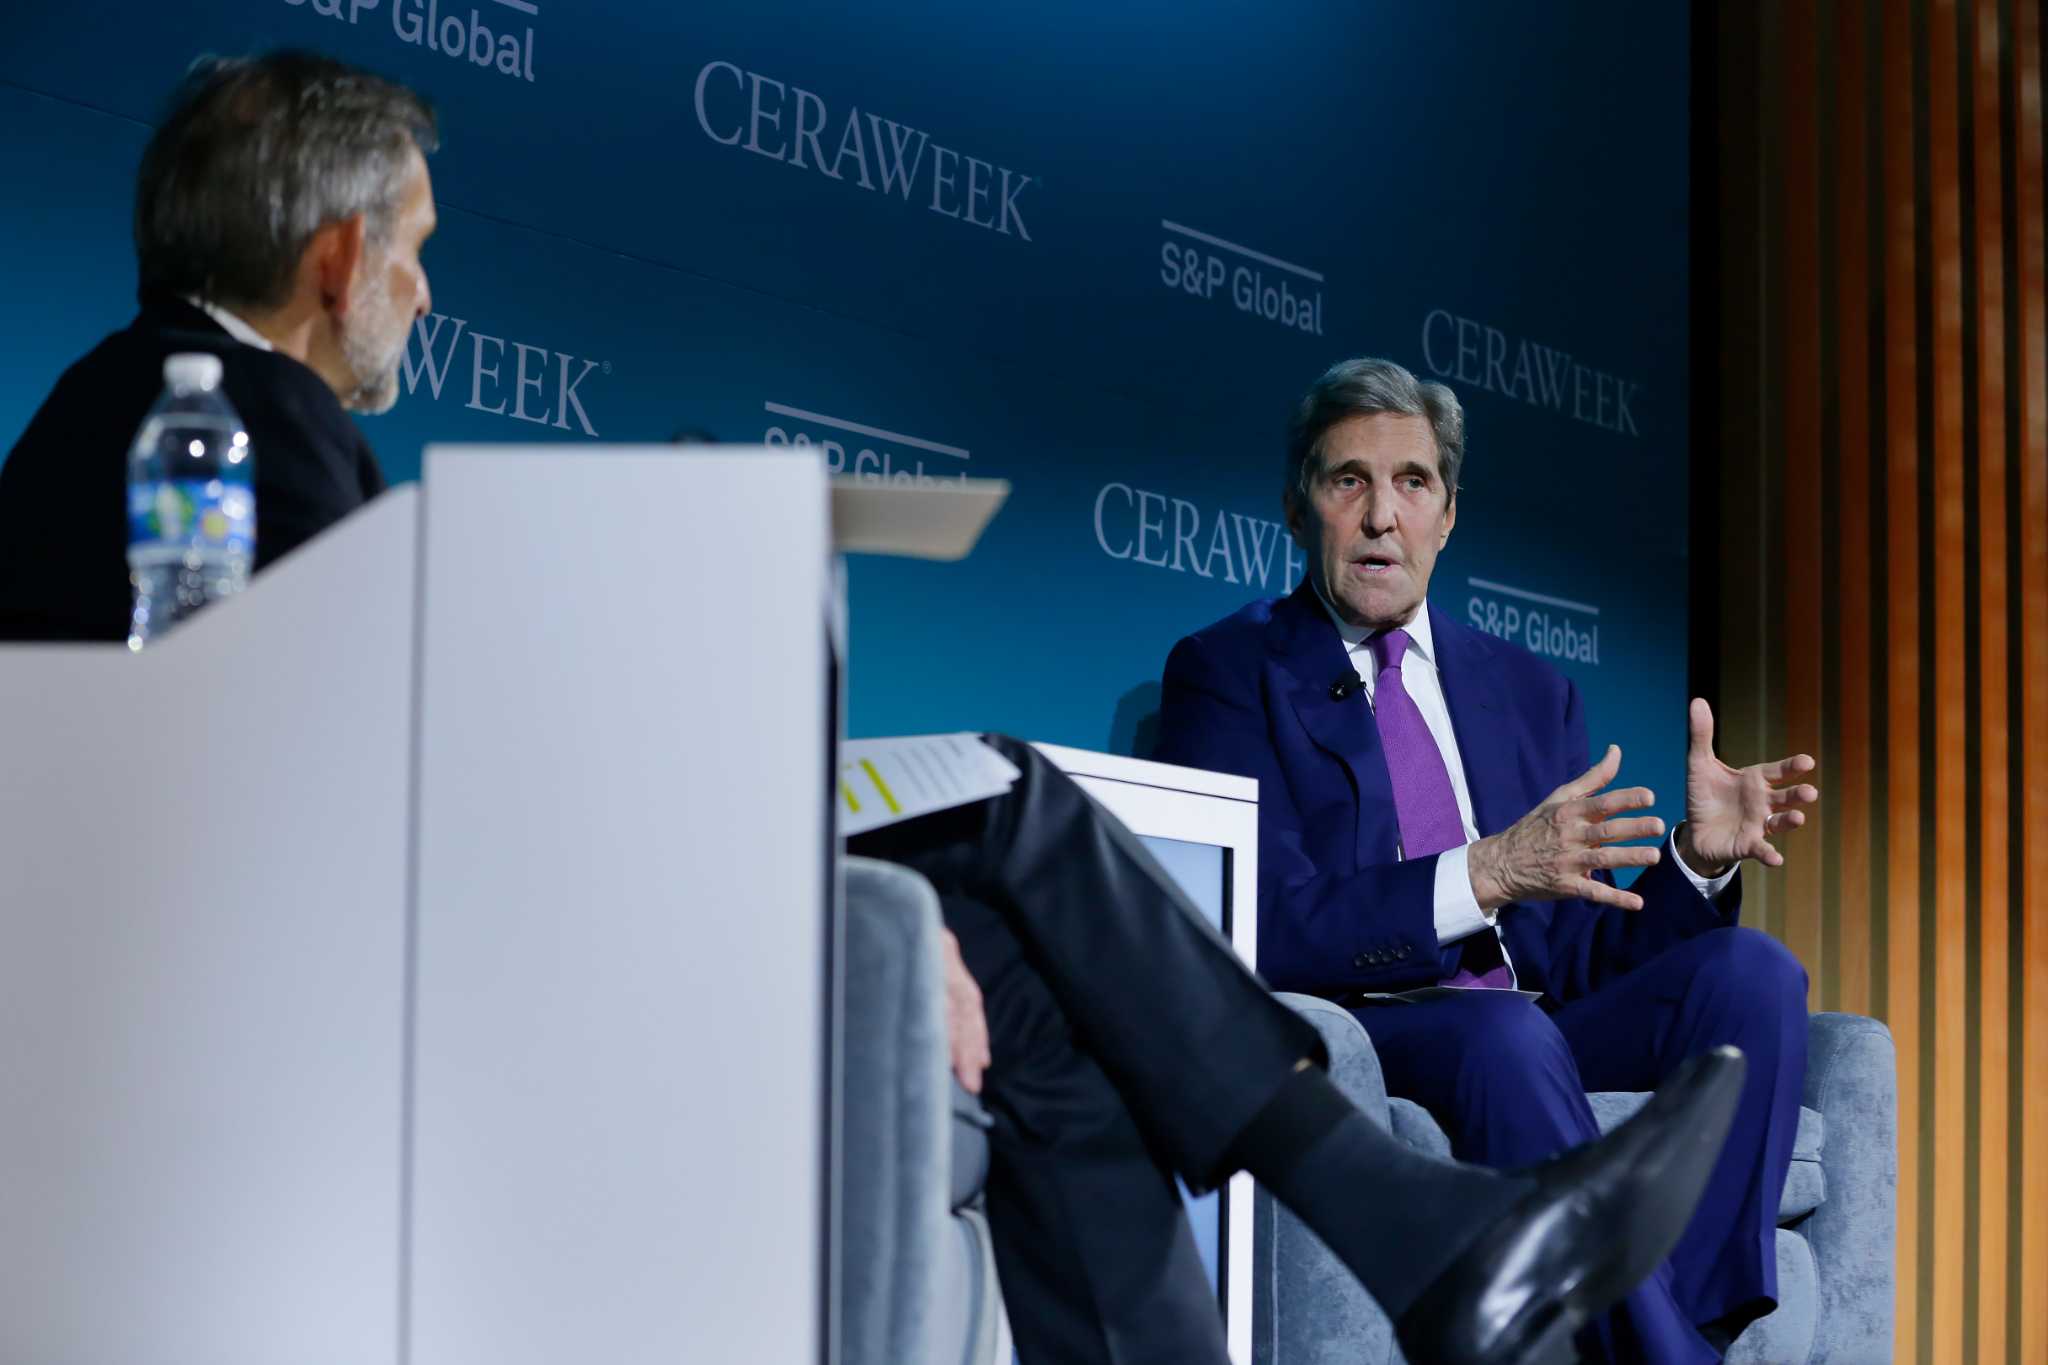 CERAWeek opens with John Kerry issuing a call to fight climate change